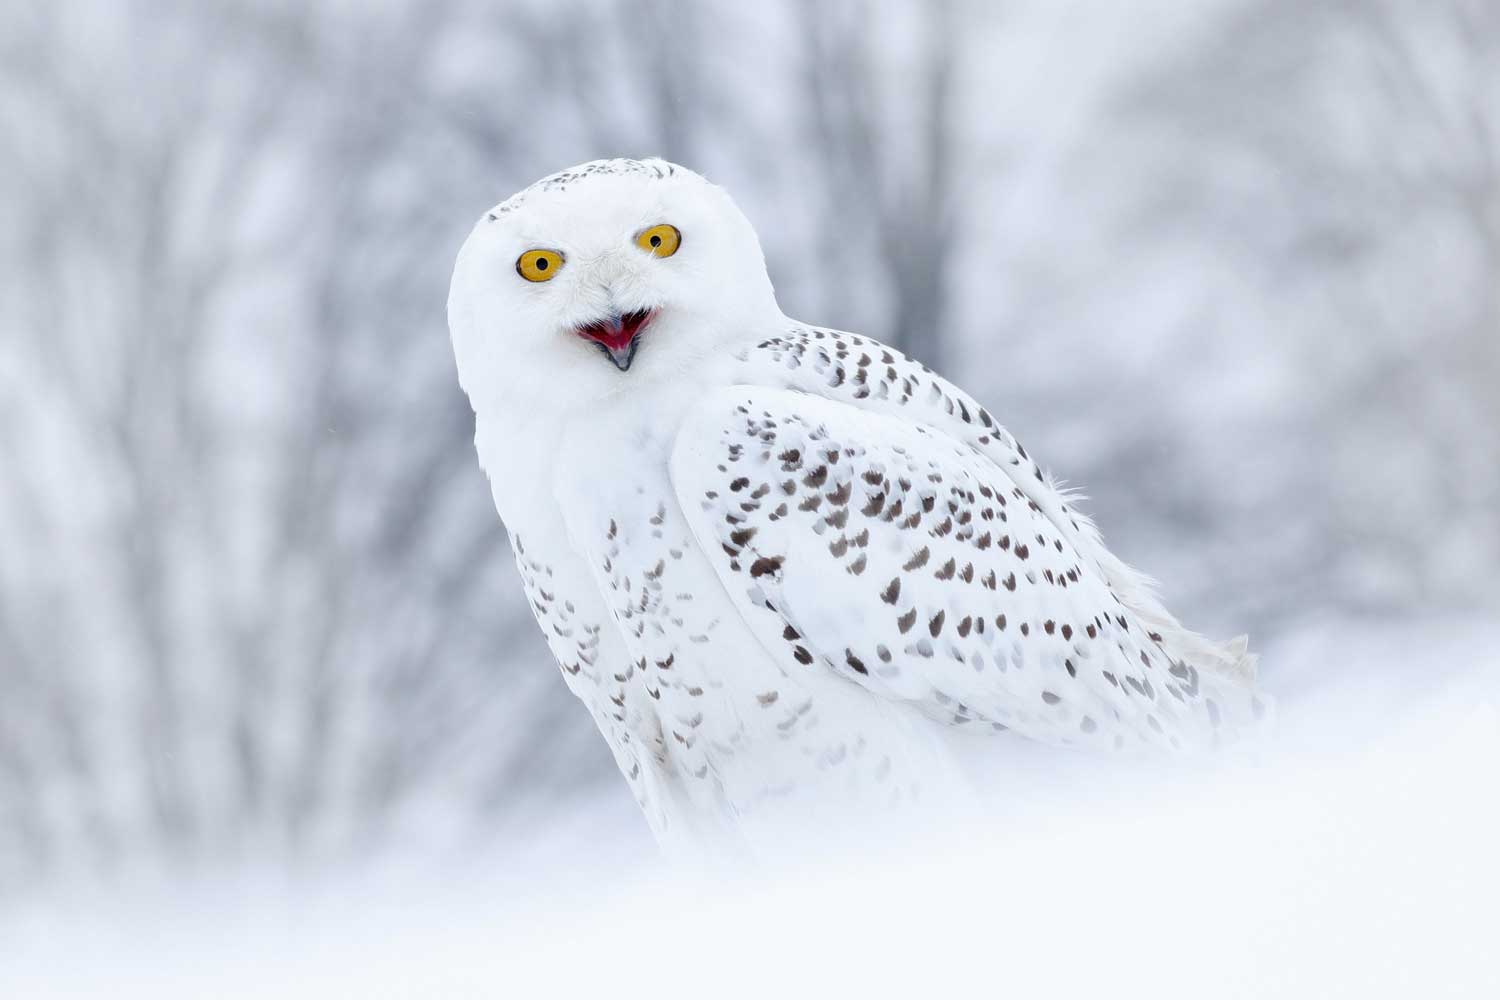 Snowy owl sitting on the ground with trees in the background.